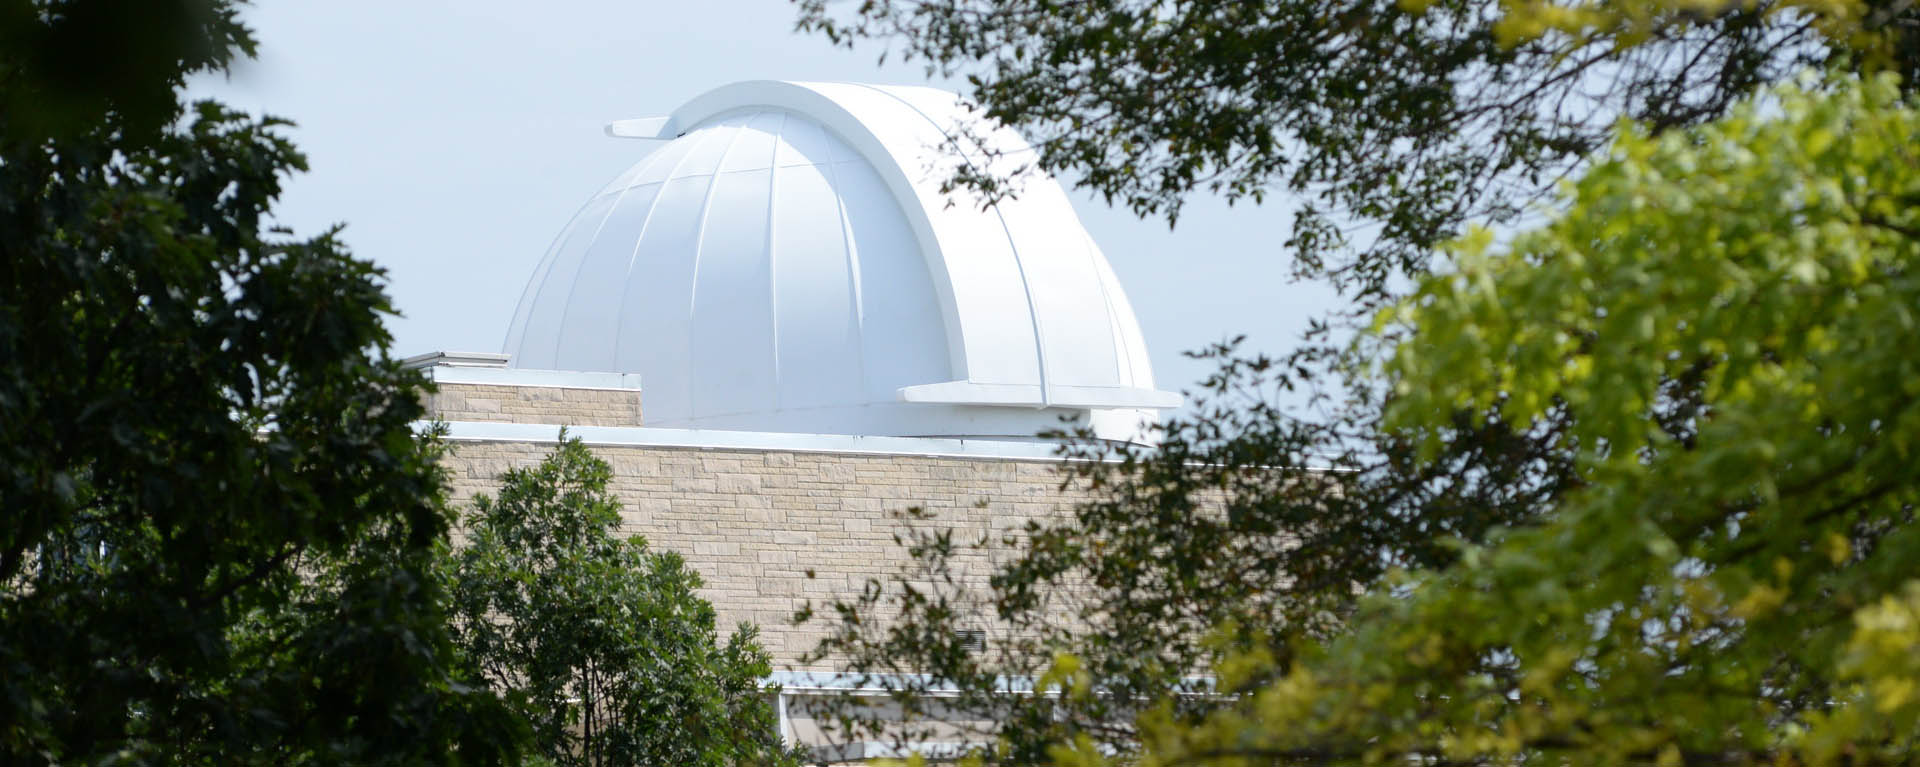 https://washburn.edu/_redesign2018/_files/images/interior/about-pages/crane-observatory-hero.jpg